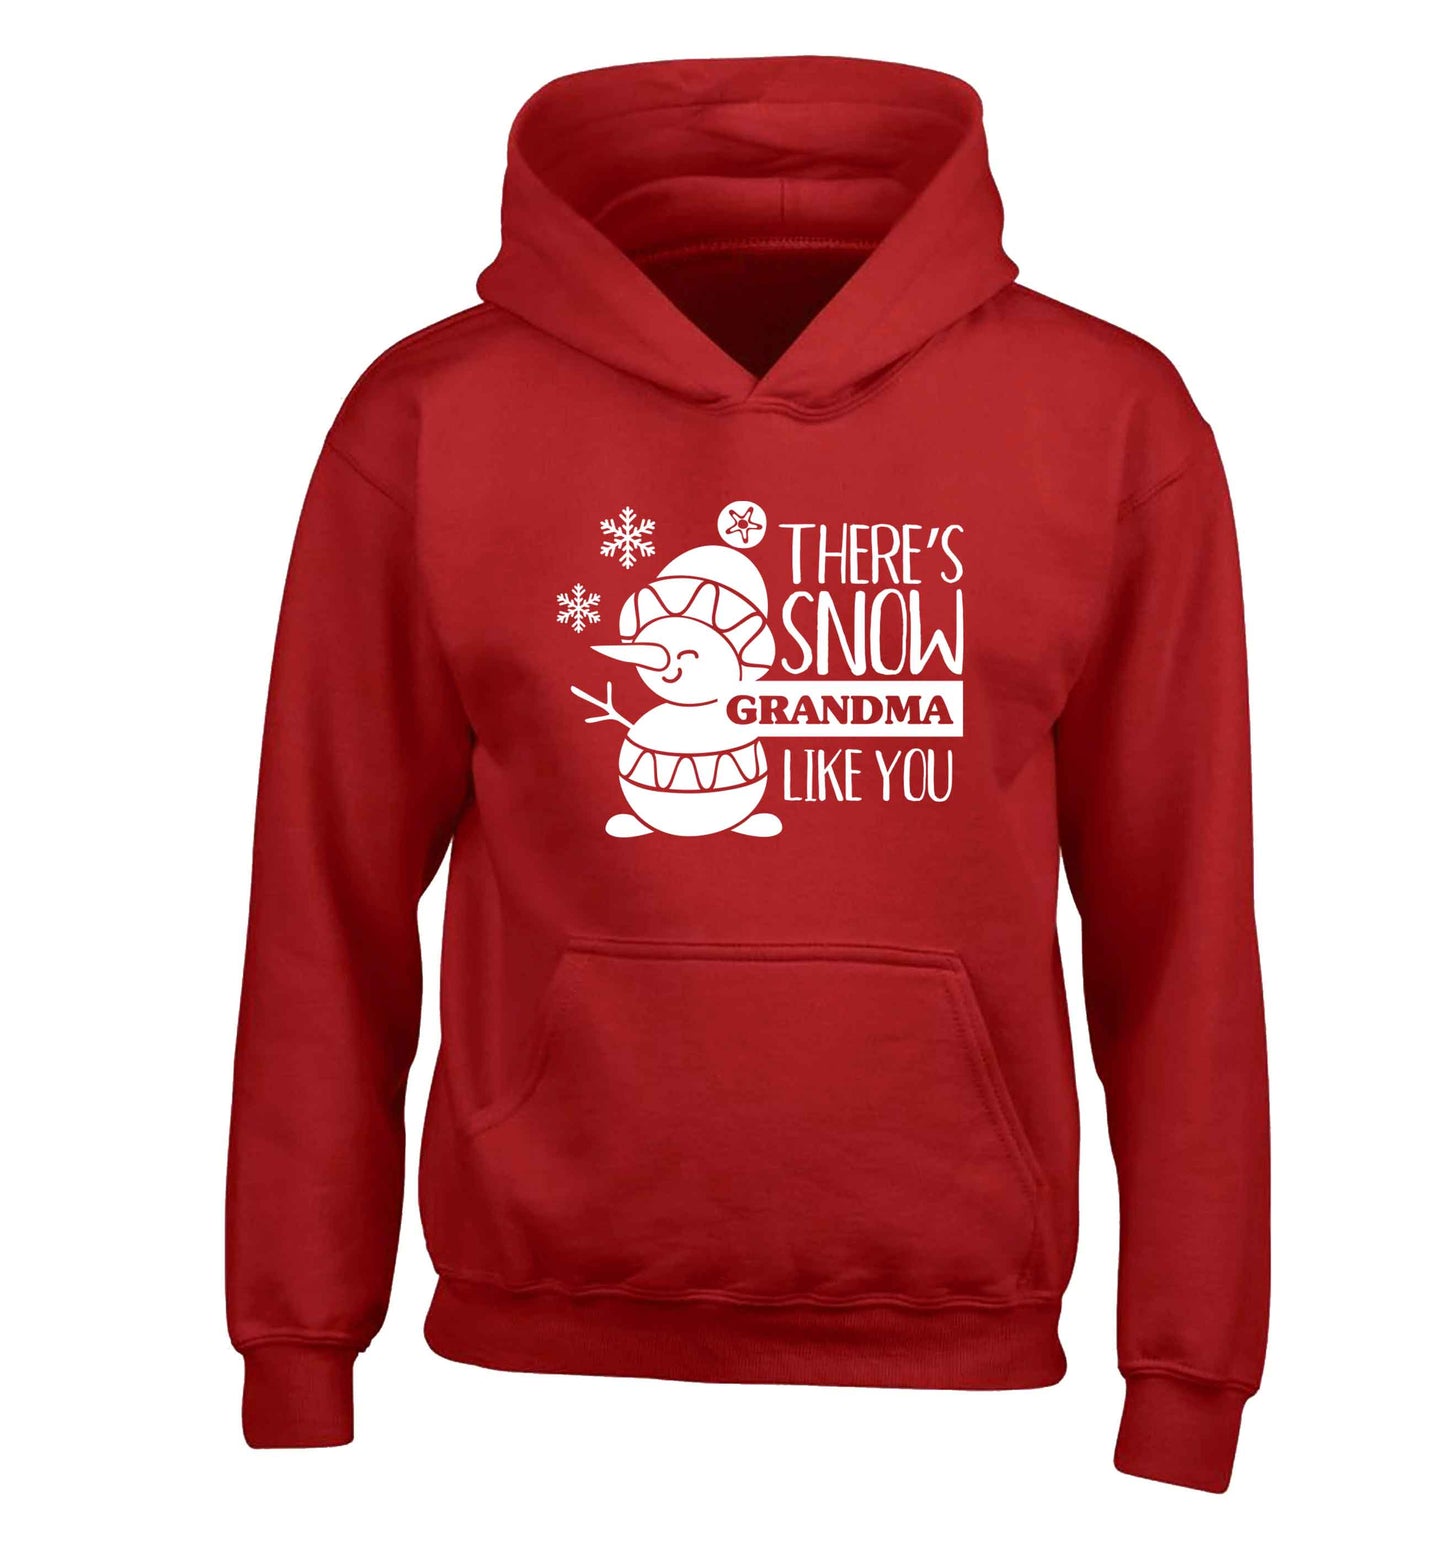 There's snow grandma like you children's red hoodie 12-13 Years